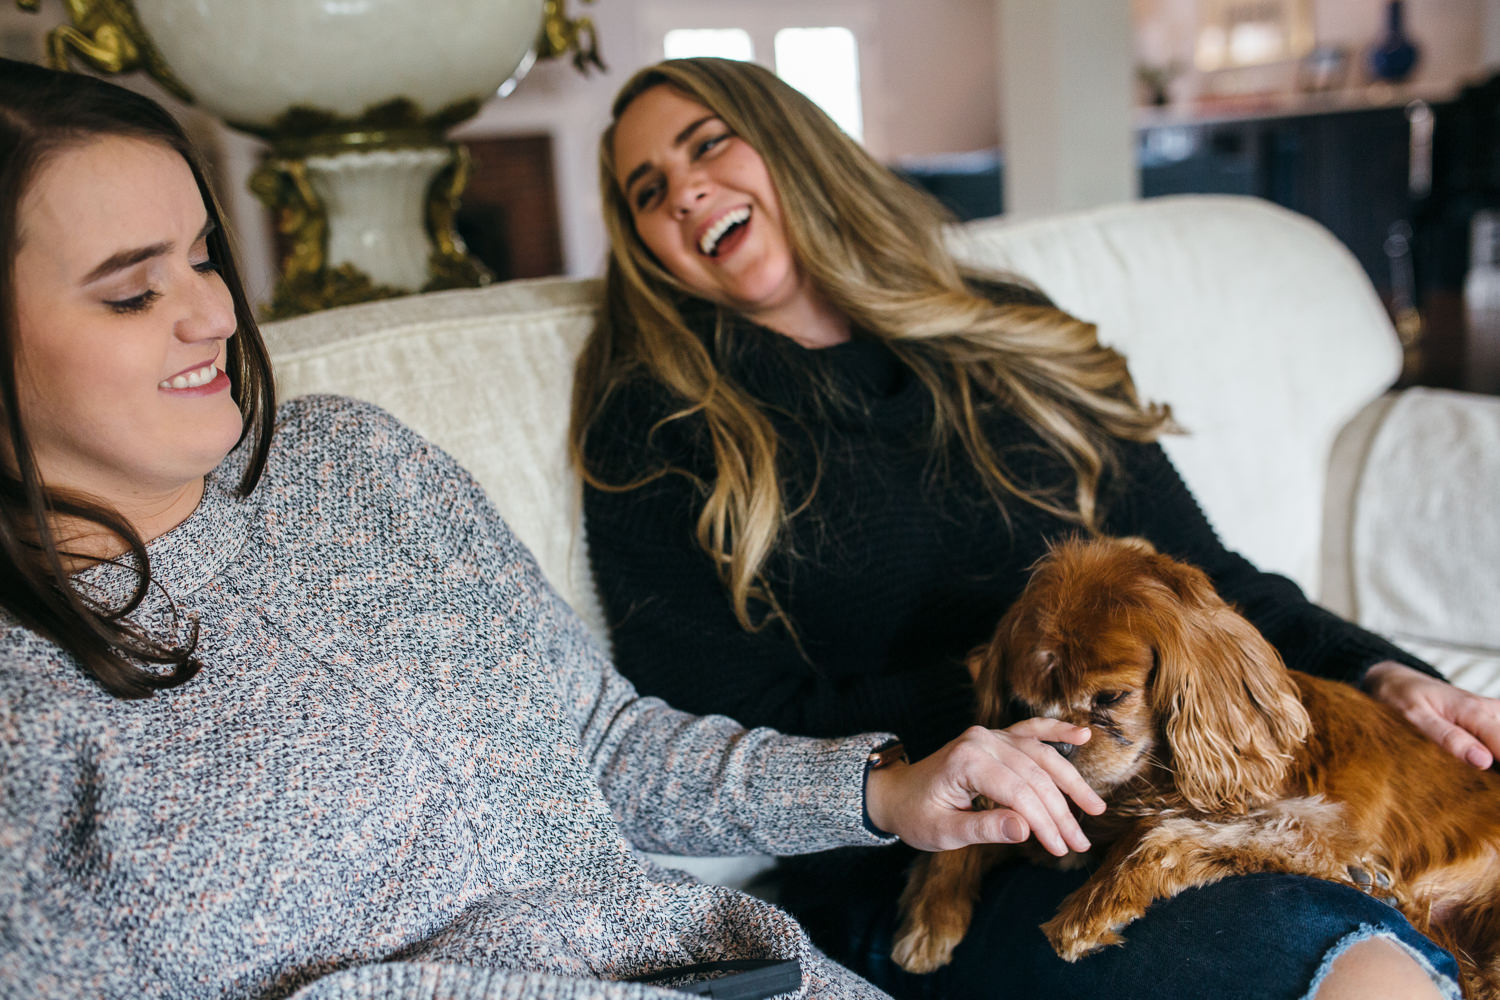 two women laughing on a cough while playing with a small dog on their lap